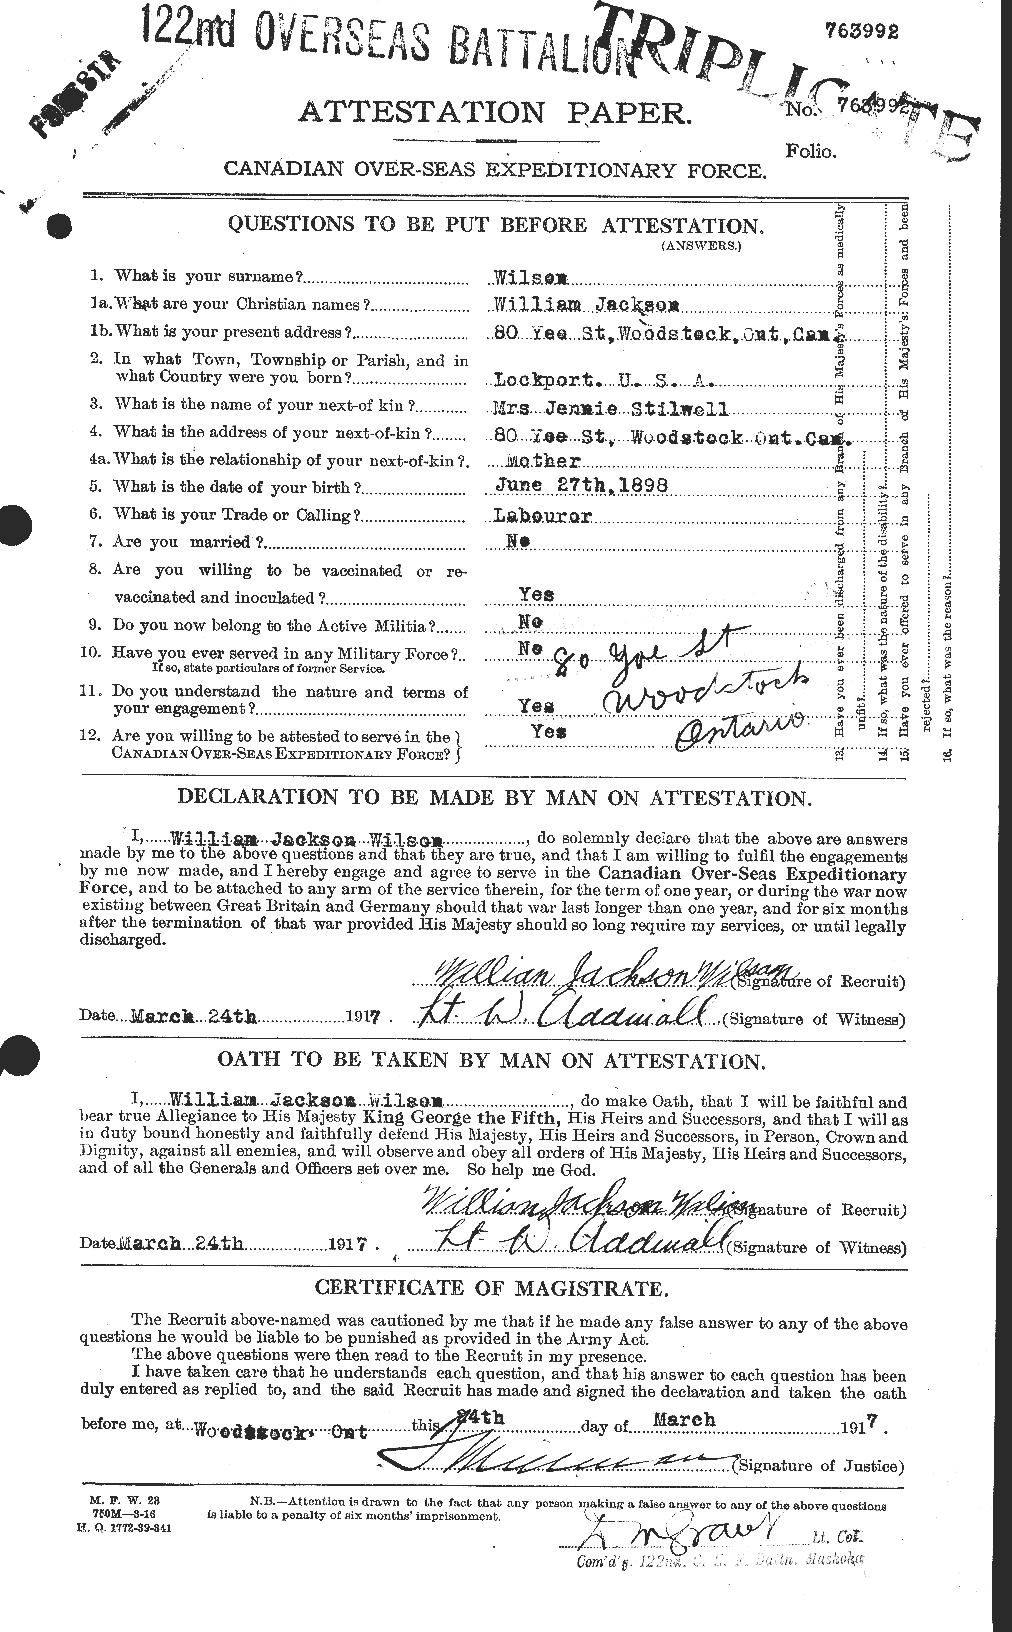 Personnel Records of the First World War - CEF 682043a